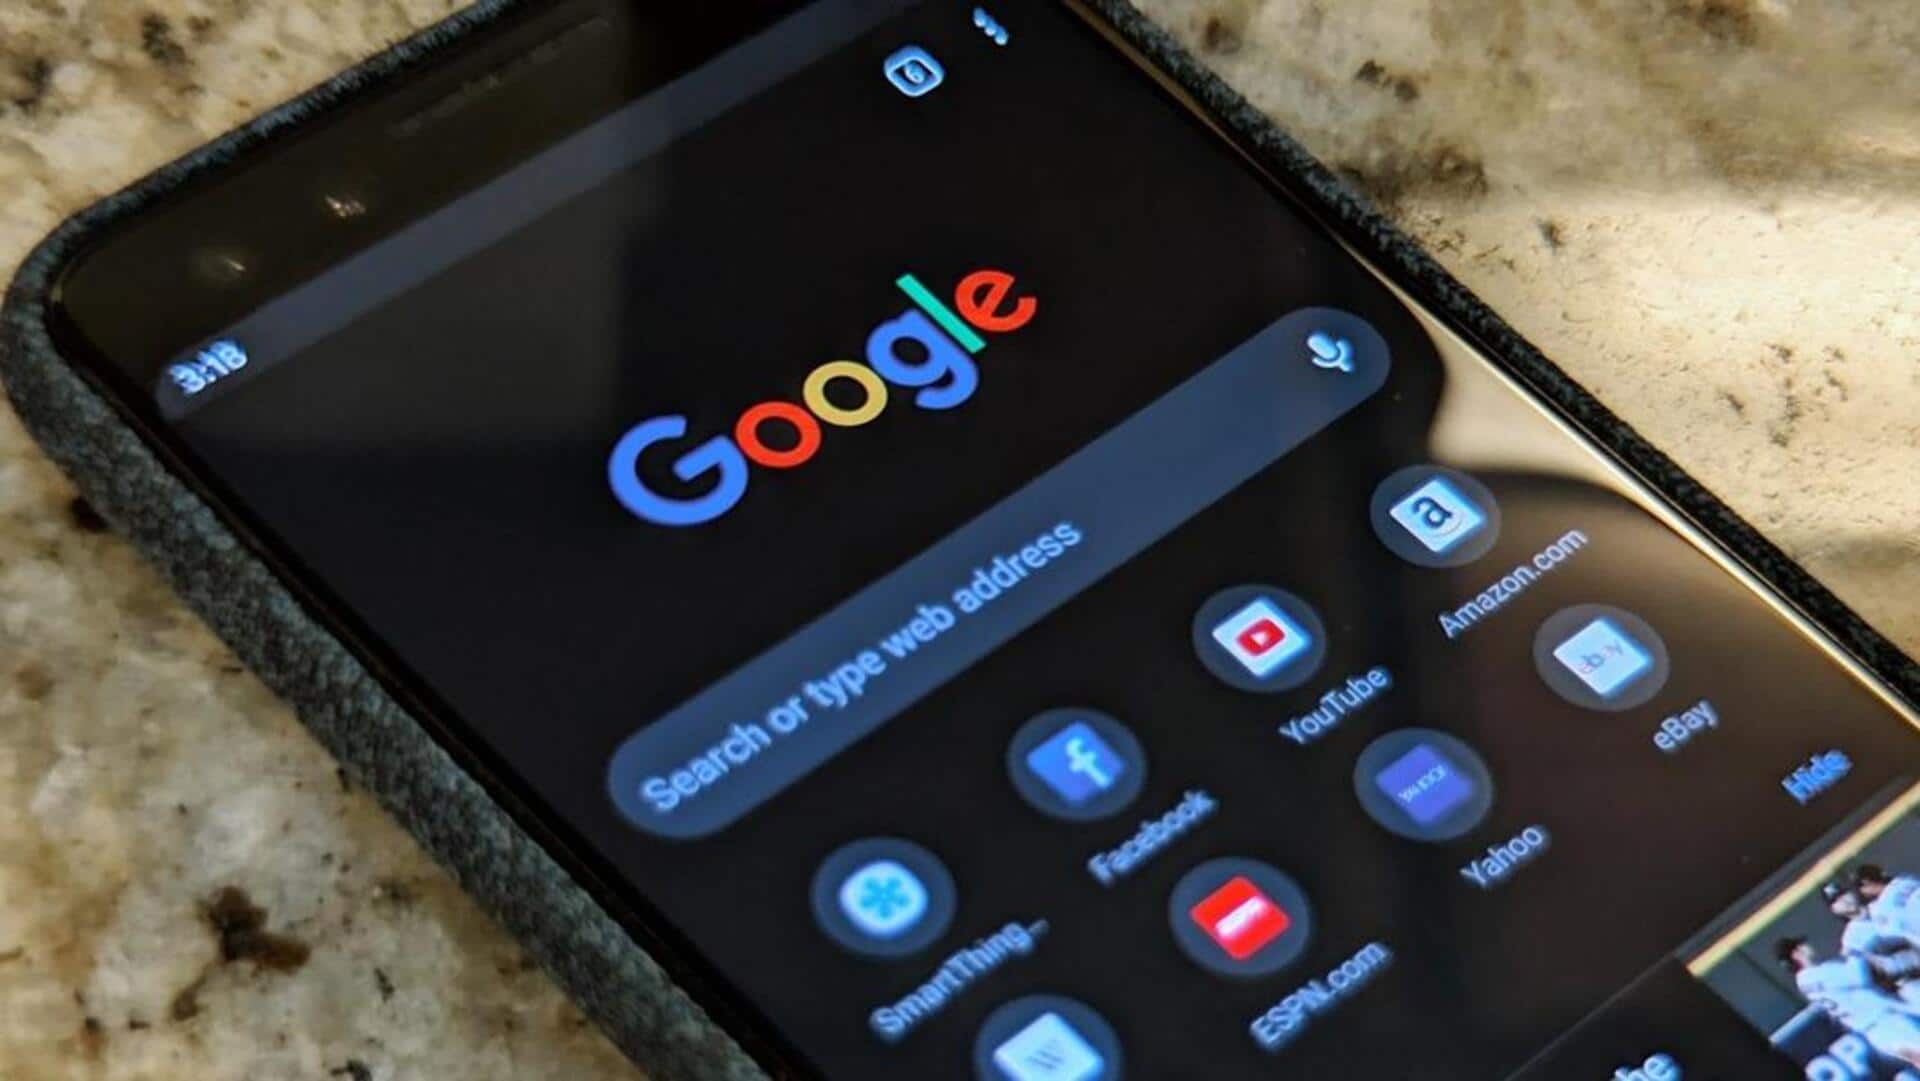 Google tests 'Auto Dark Mode' on iOS: How it works